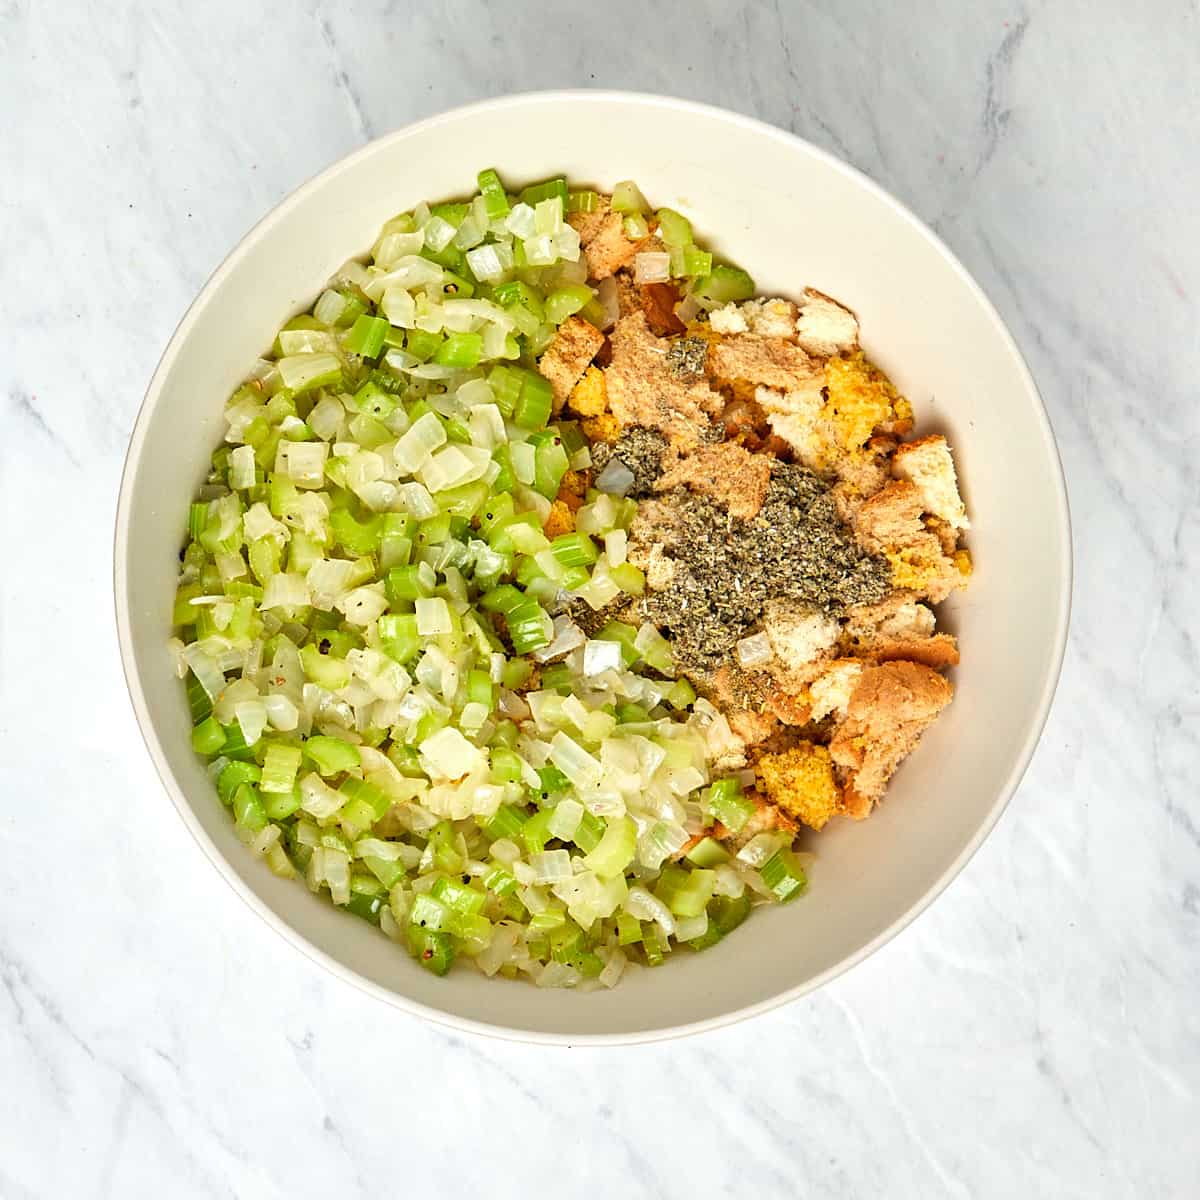 cornbread, bread, spices, and sauteed onion and celery in a bowl